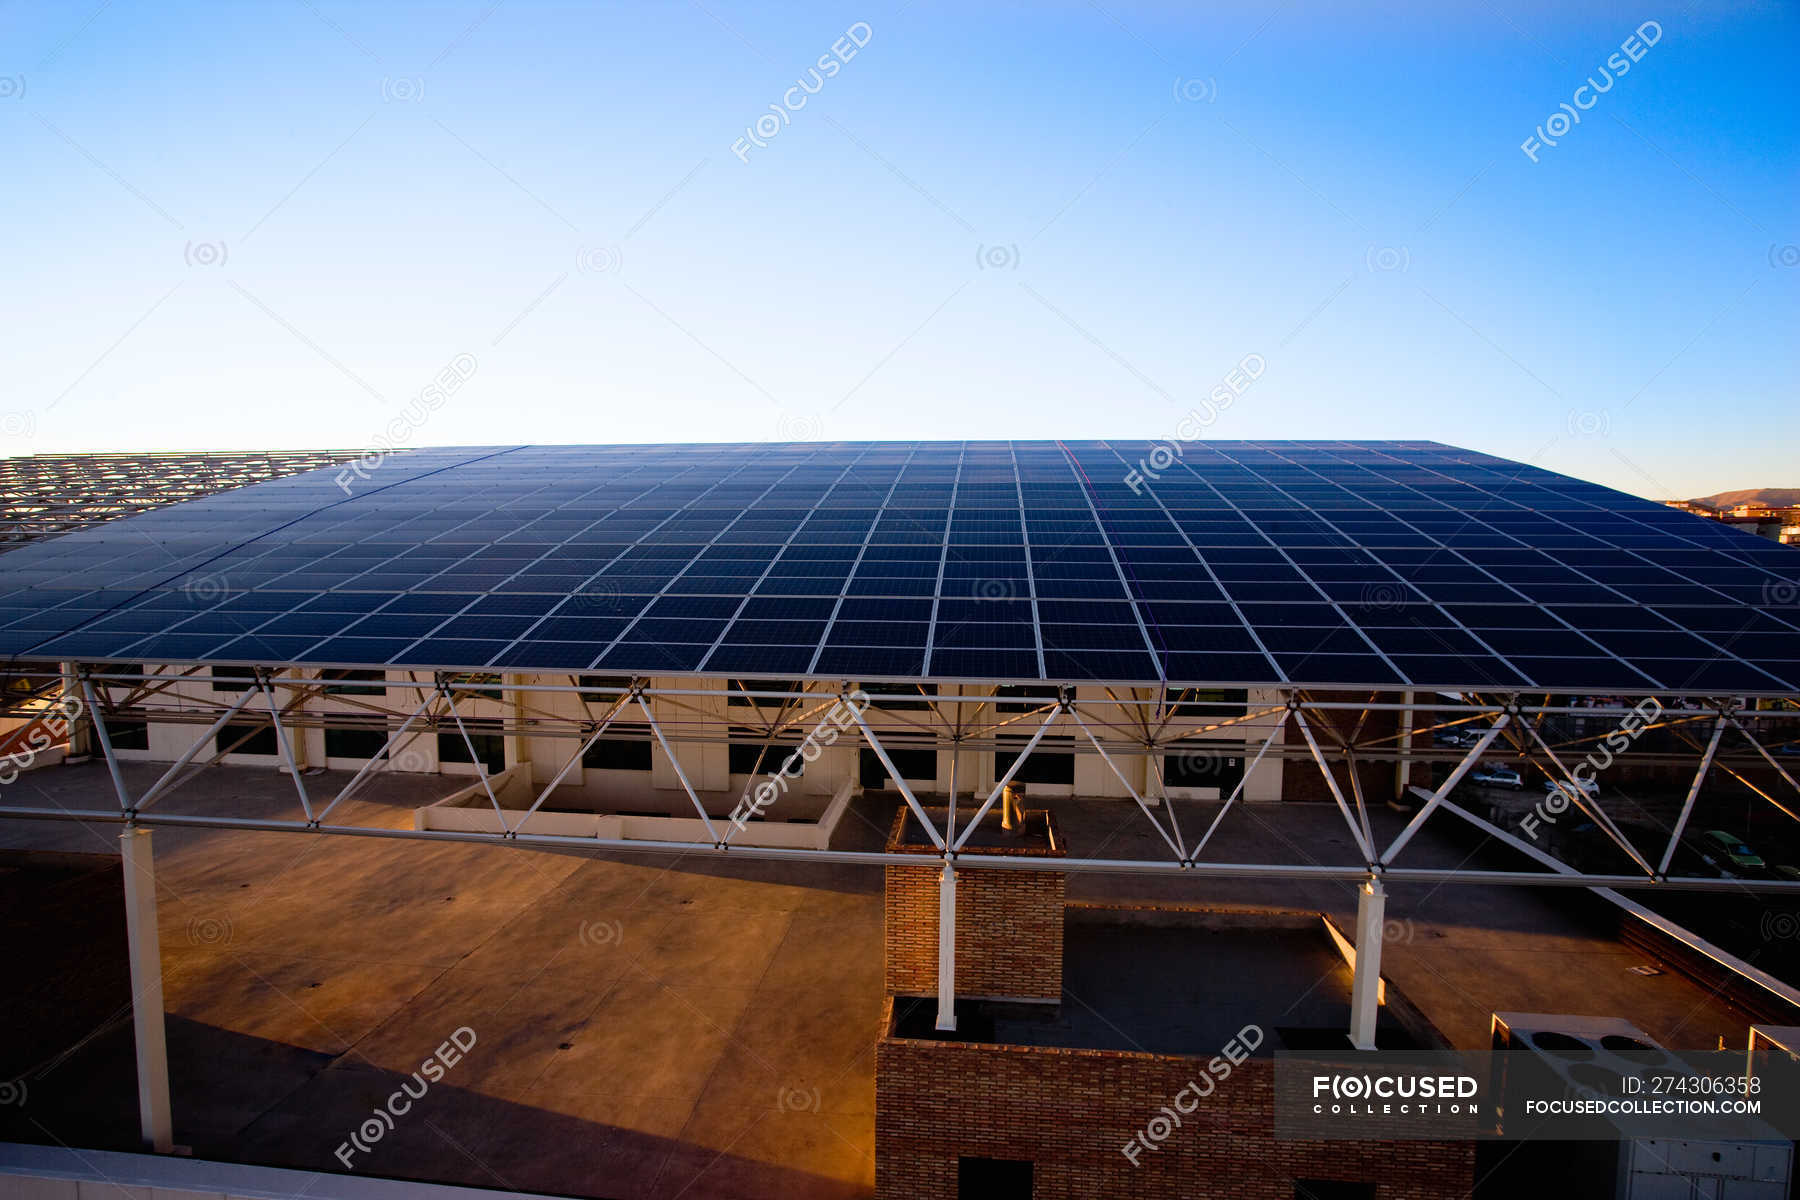 Building with roof made of solar panels under blue sky — urban, futuristic  - Stock Photo | #274306358